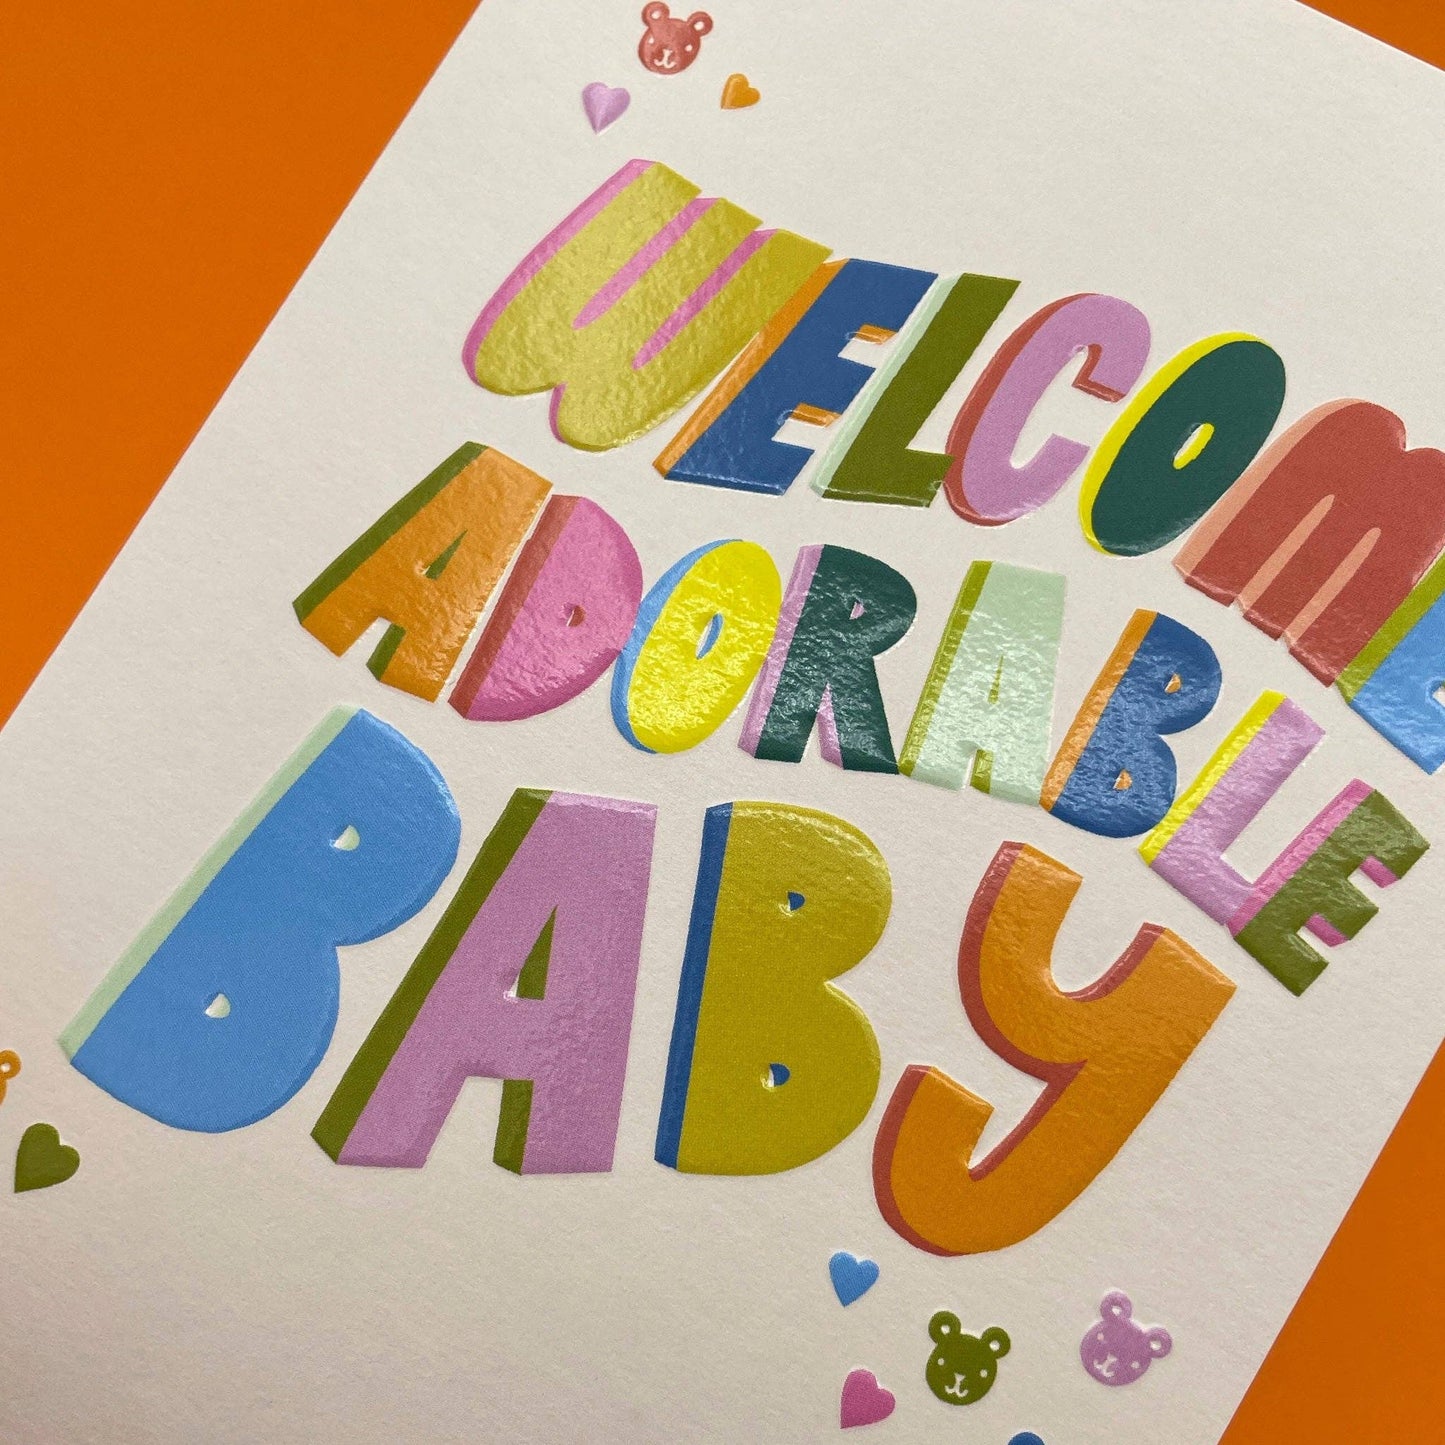 'Welcome Adorable Baby' Card